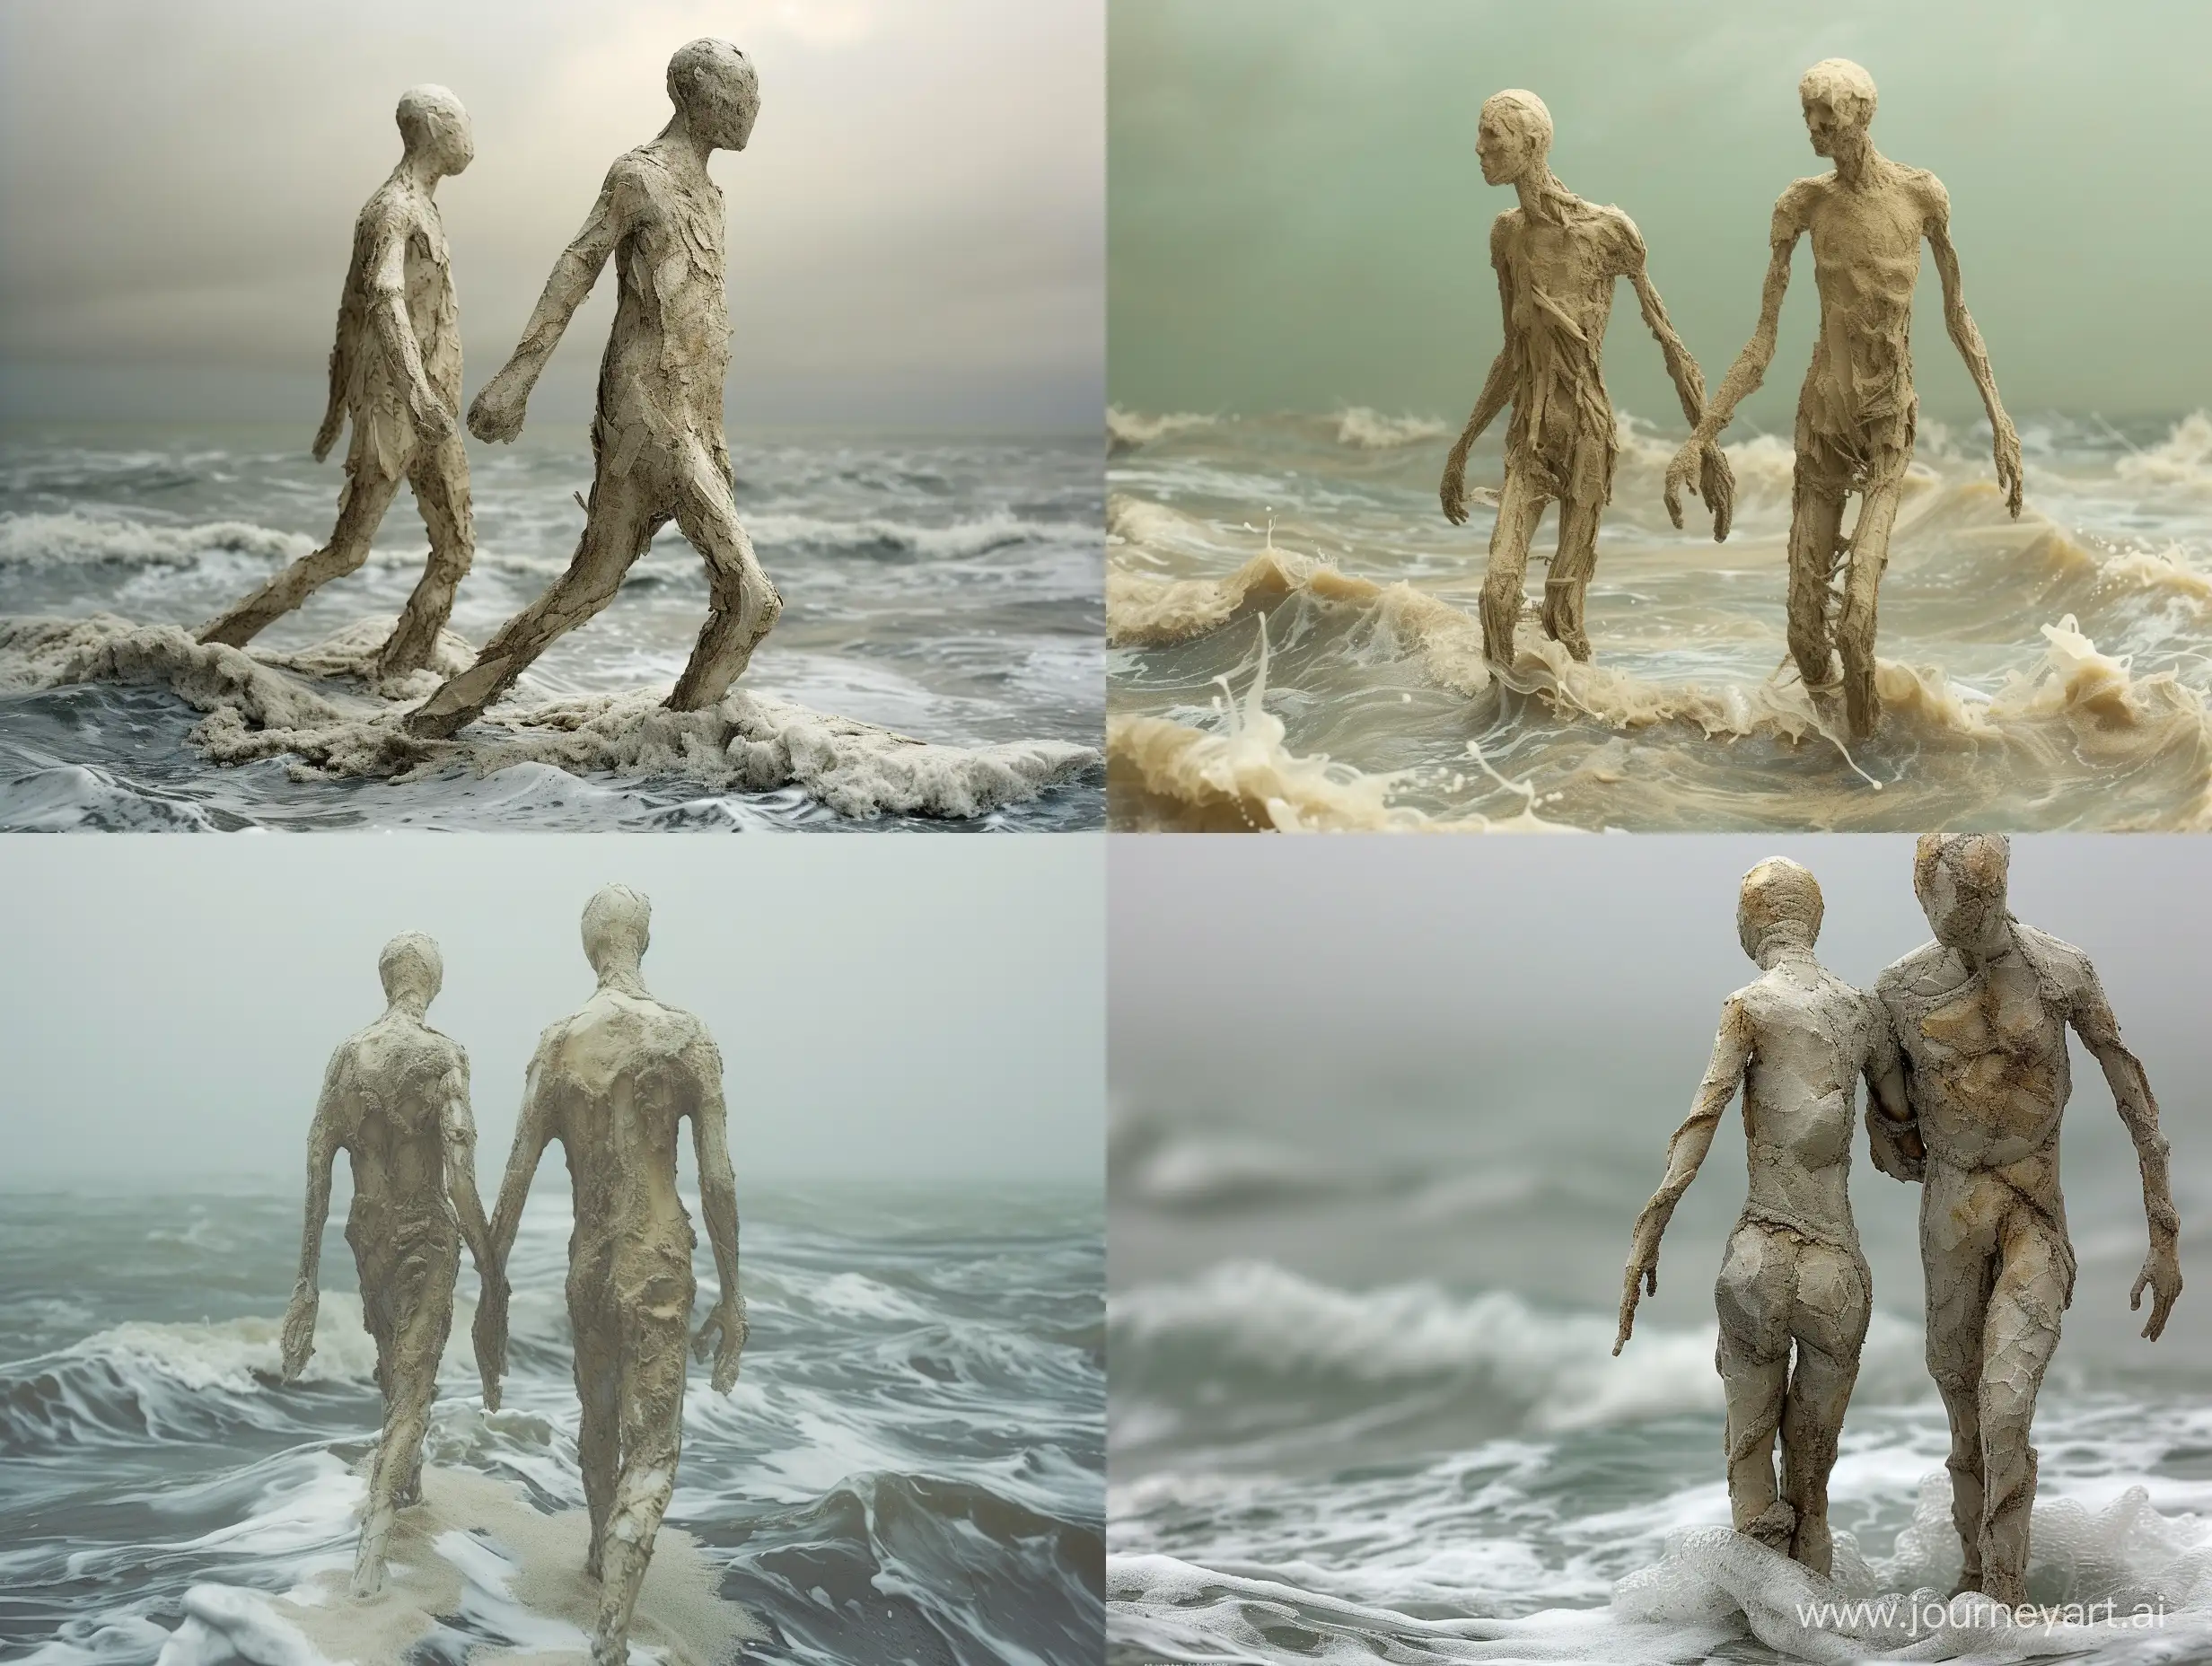 Human figures whose bodies are made entirely of sand walk together on a choppy sea —stylize 250